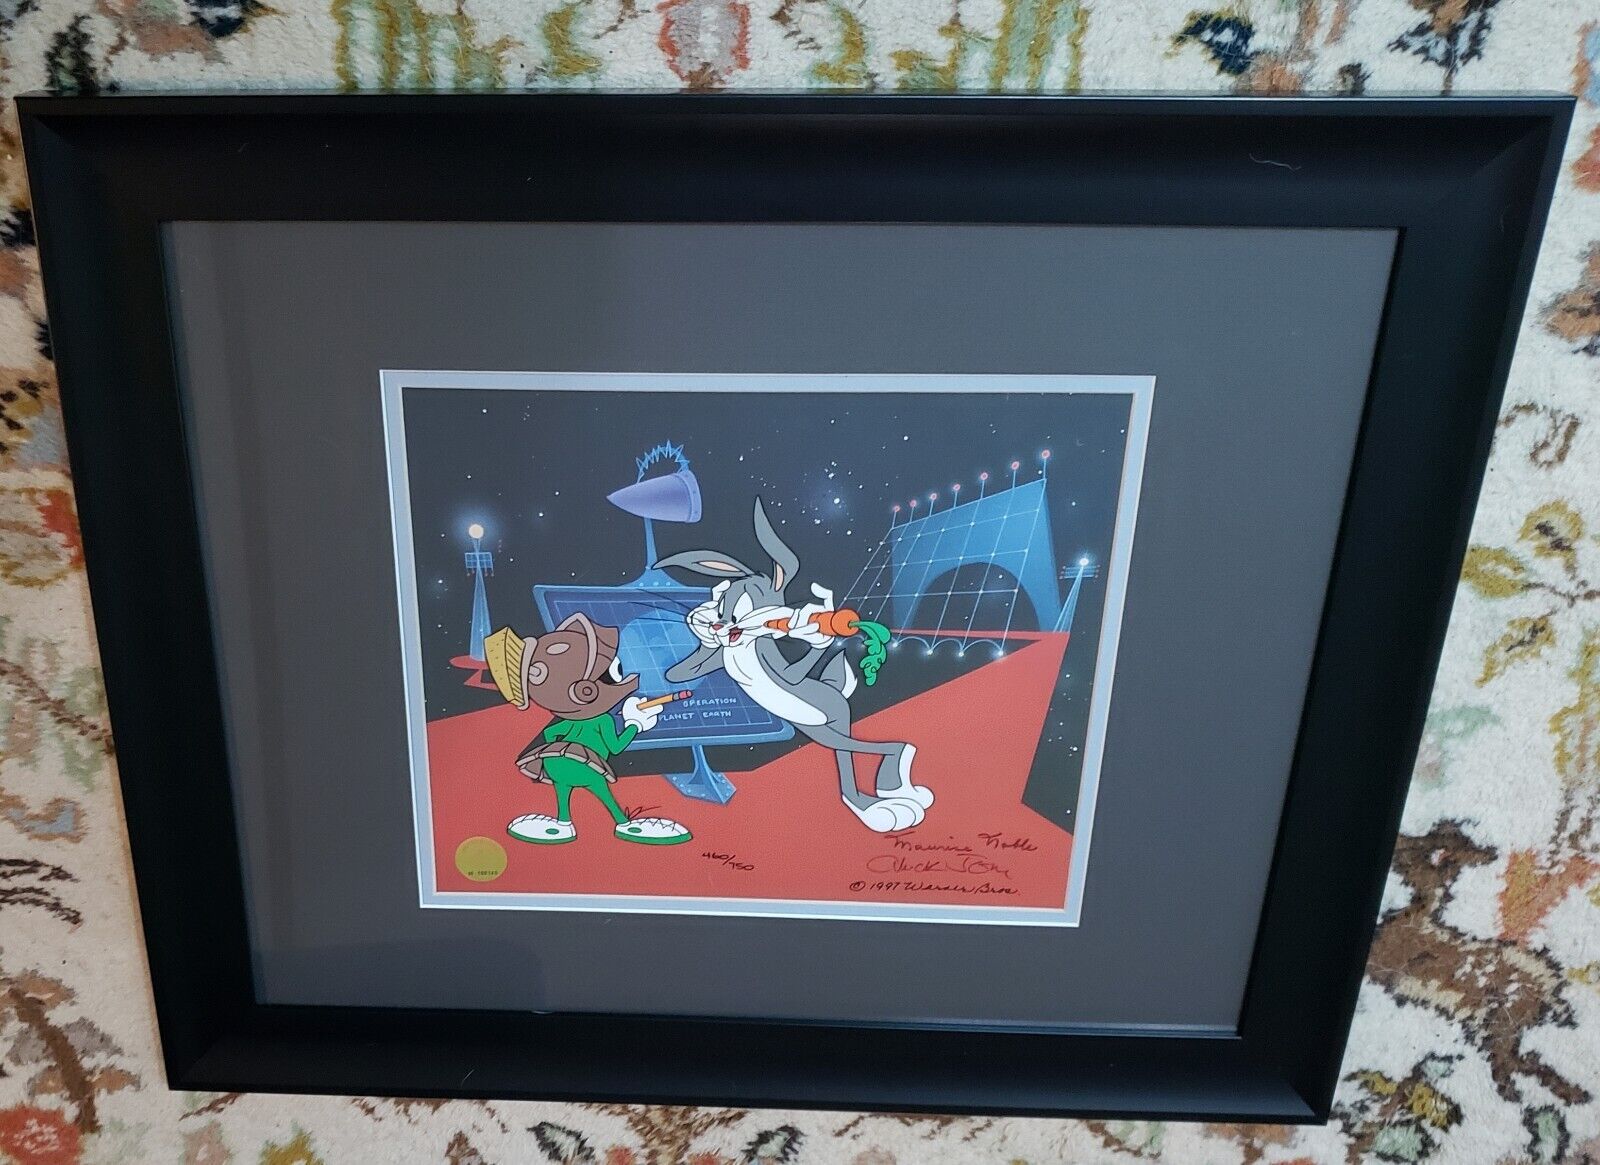 WARNER BROTHERS🔥 CEL 460/750 OPERATION: EARTH SIGNED BY CHUCK JONES- M NOBL